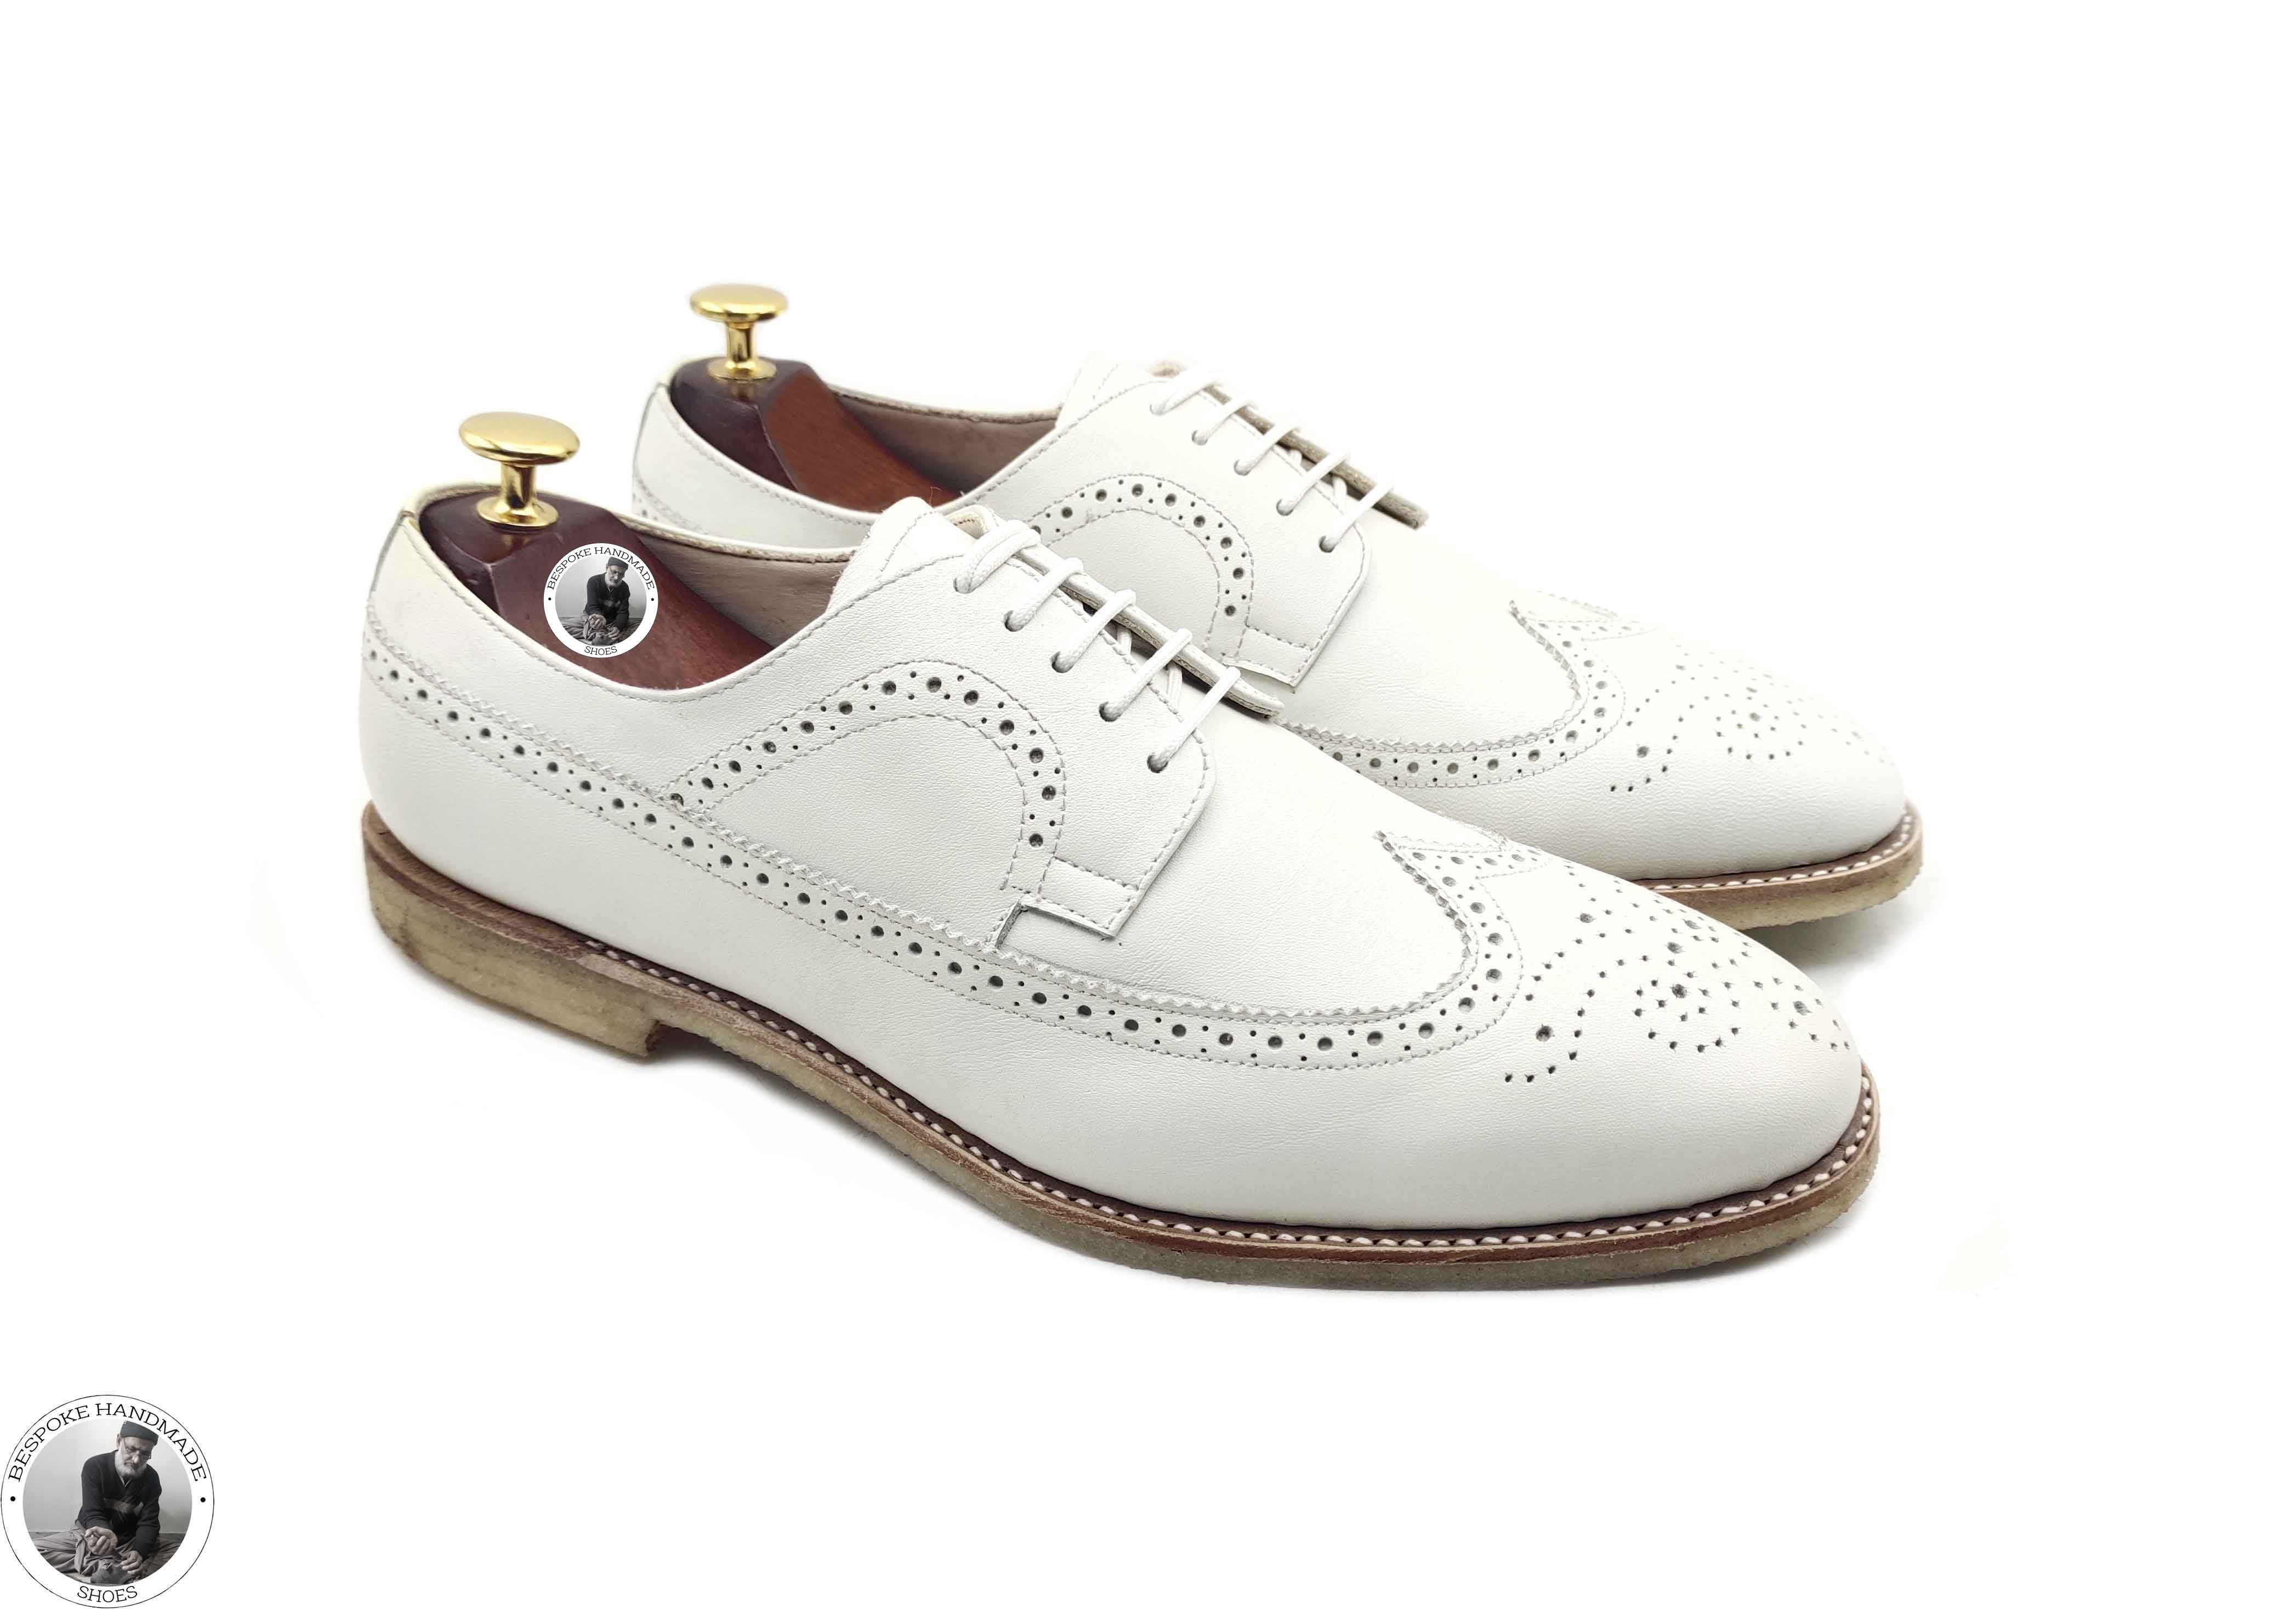 New Handmade Dress Shoes, Pure White Leather Oxford Wingtip Lace Up Dress Shoe